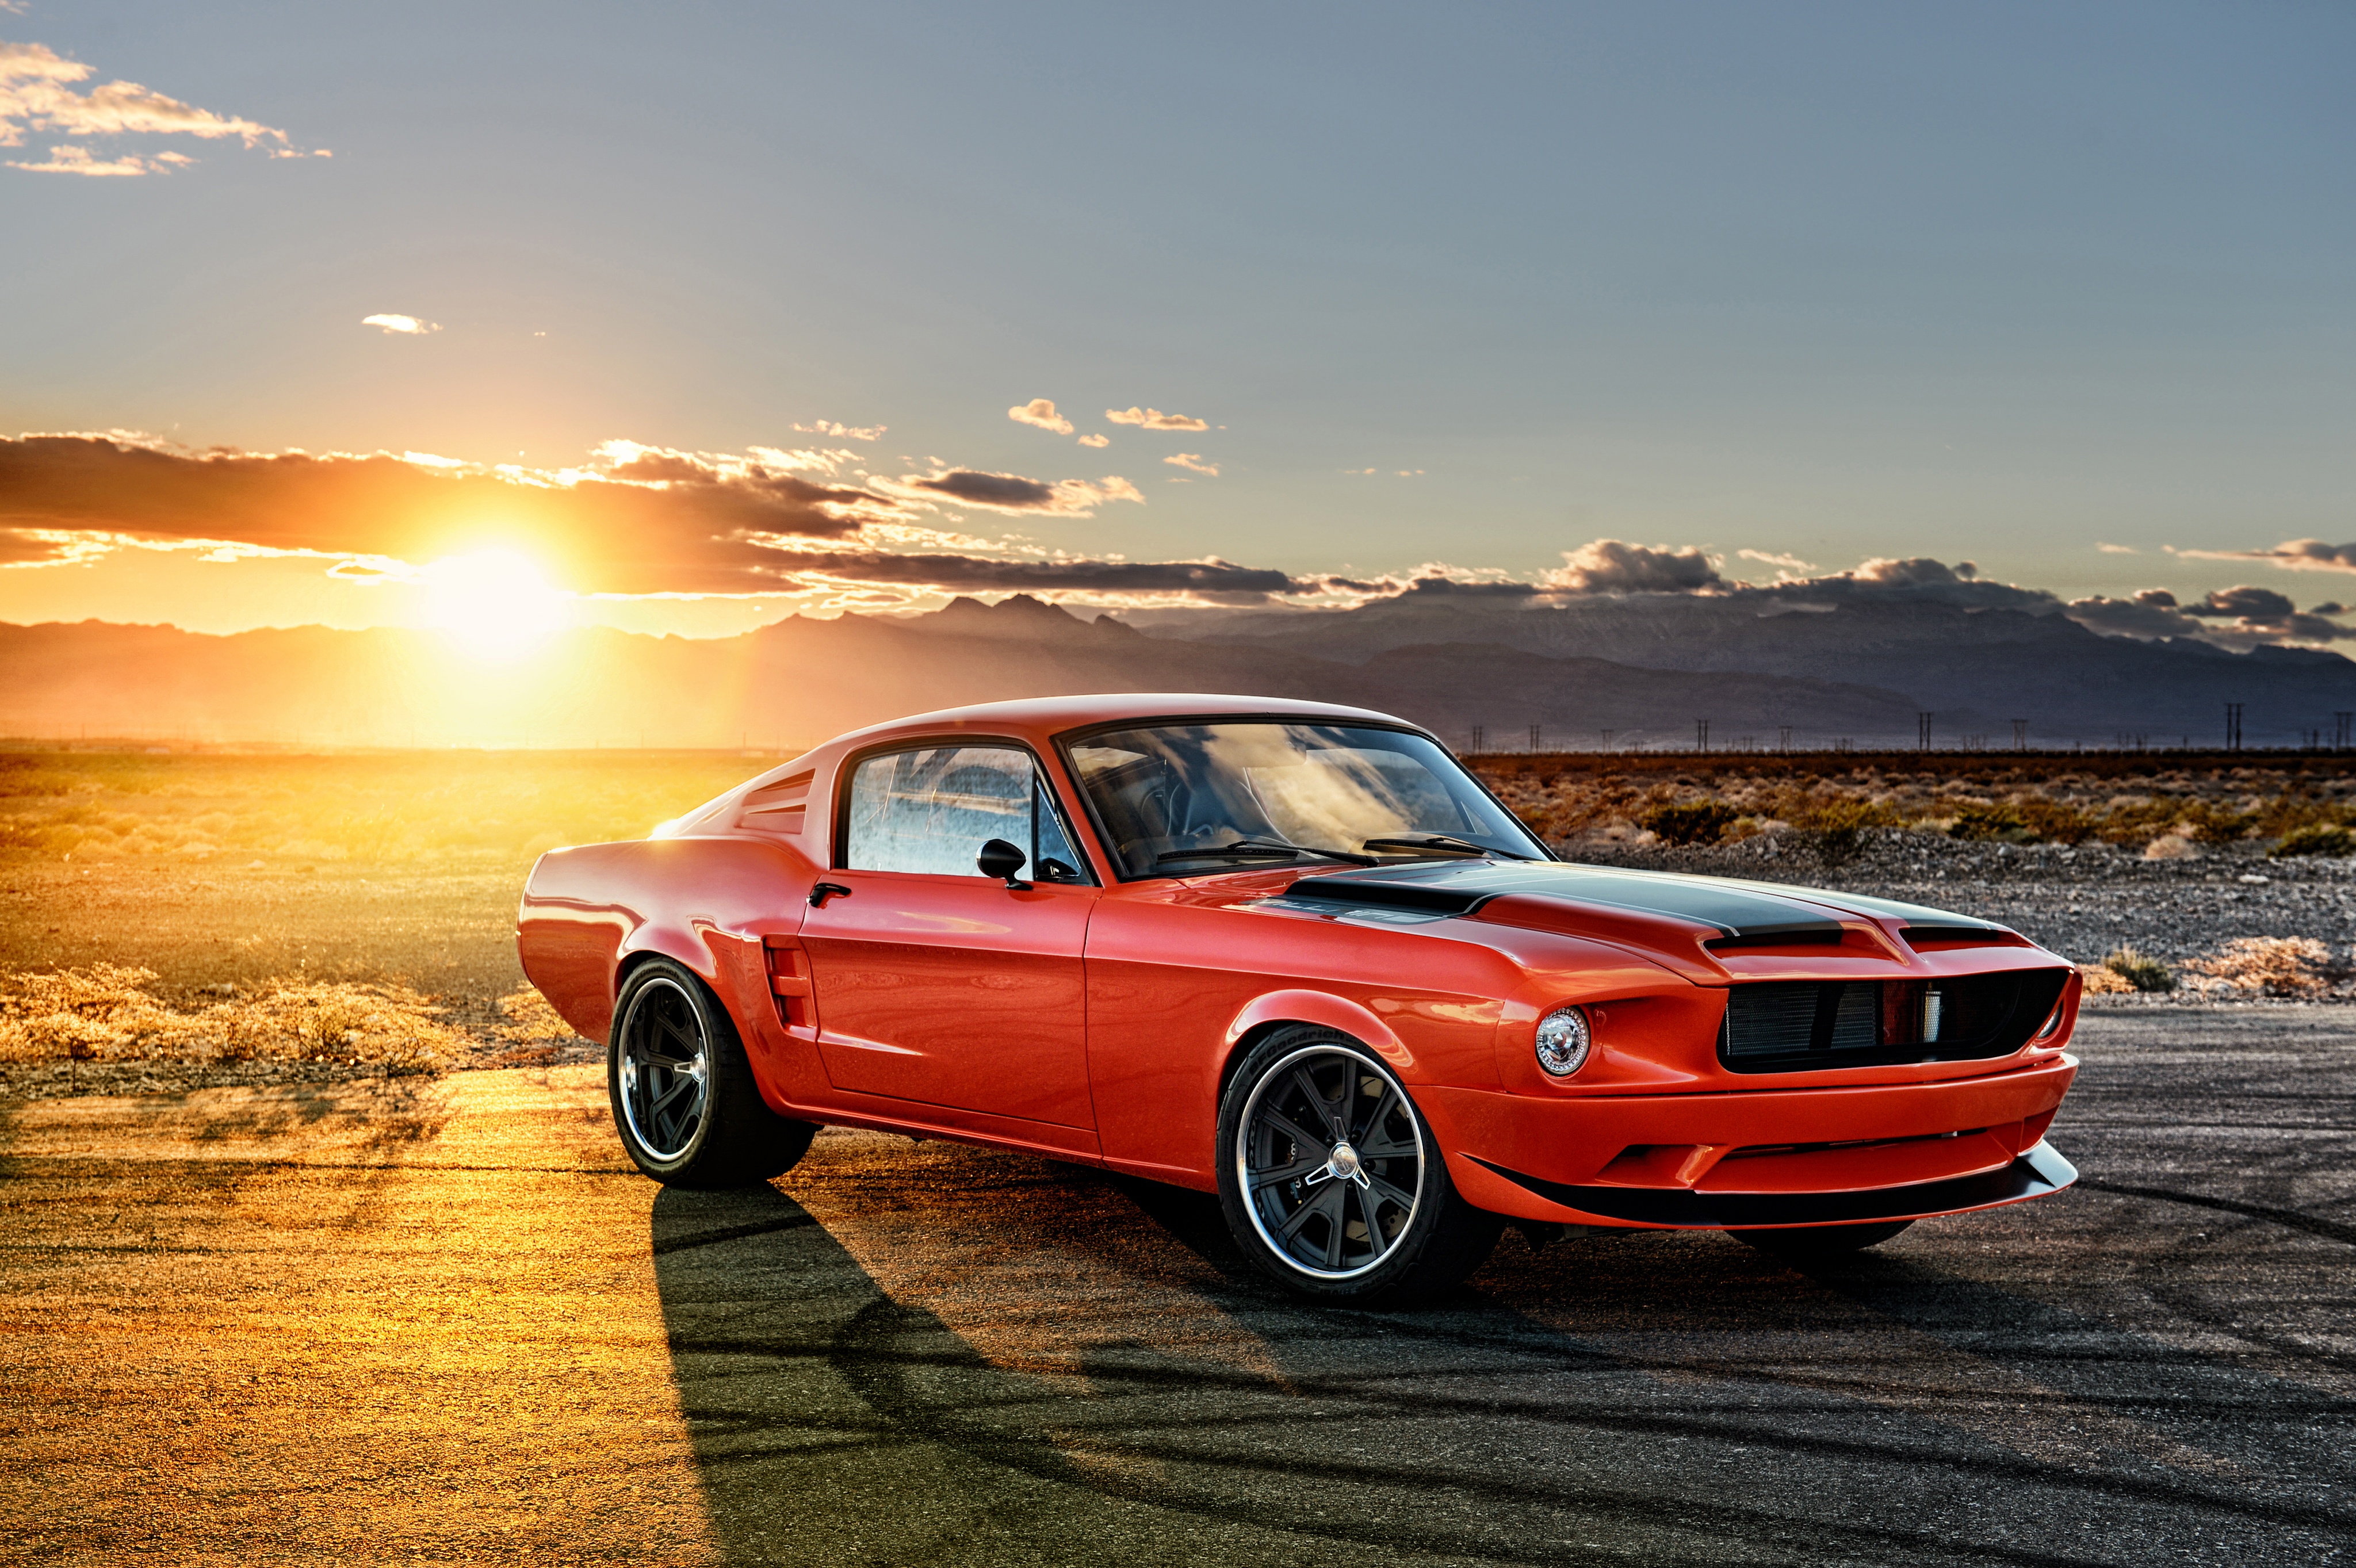 ford mustang fastback, vehicles, car, fastback, ford mustang, ford, muscle car, sunset